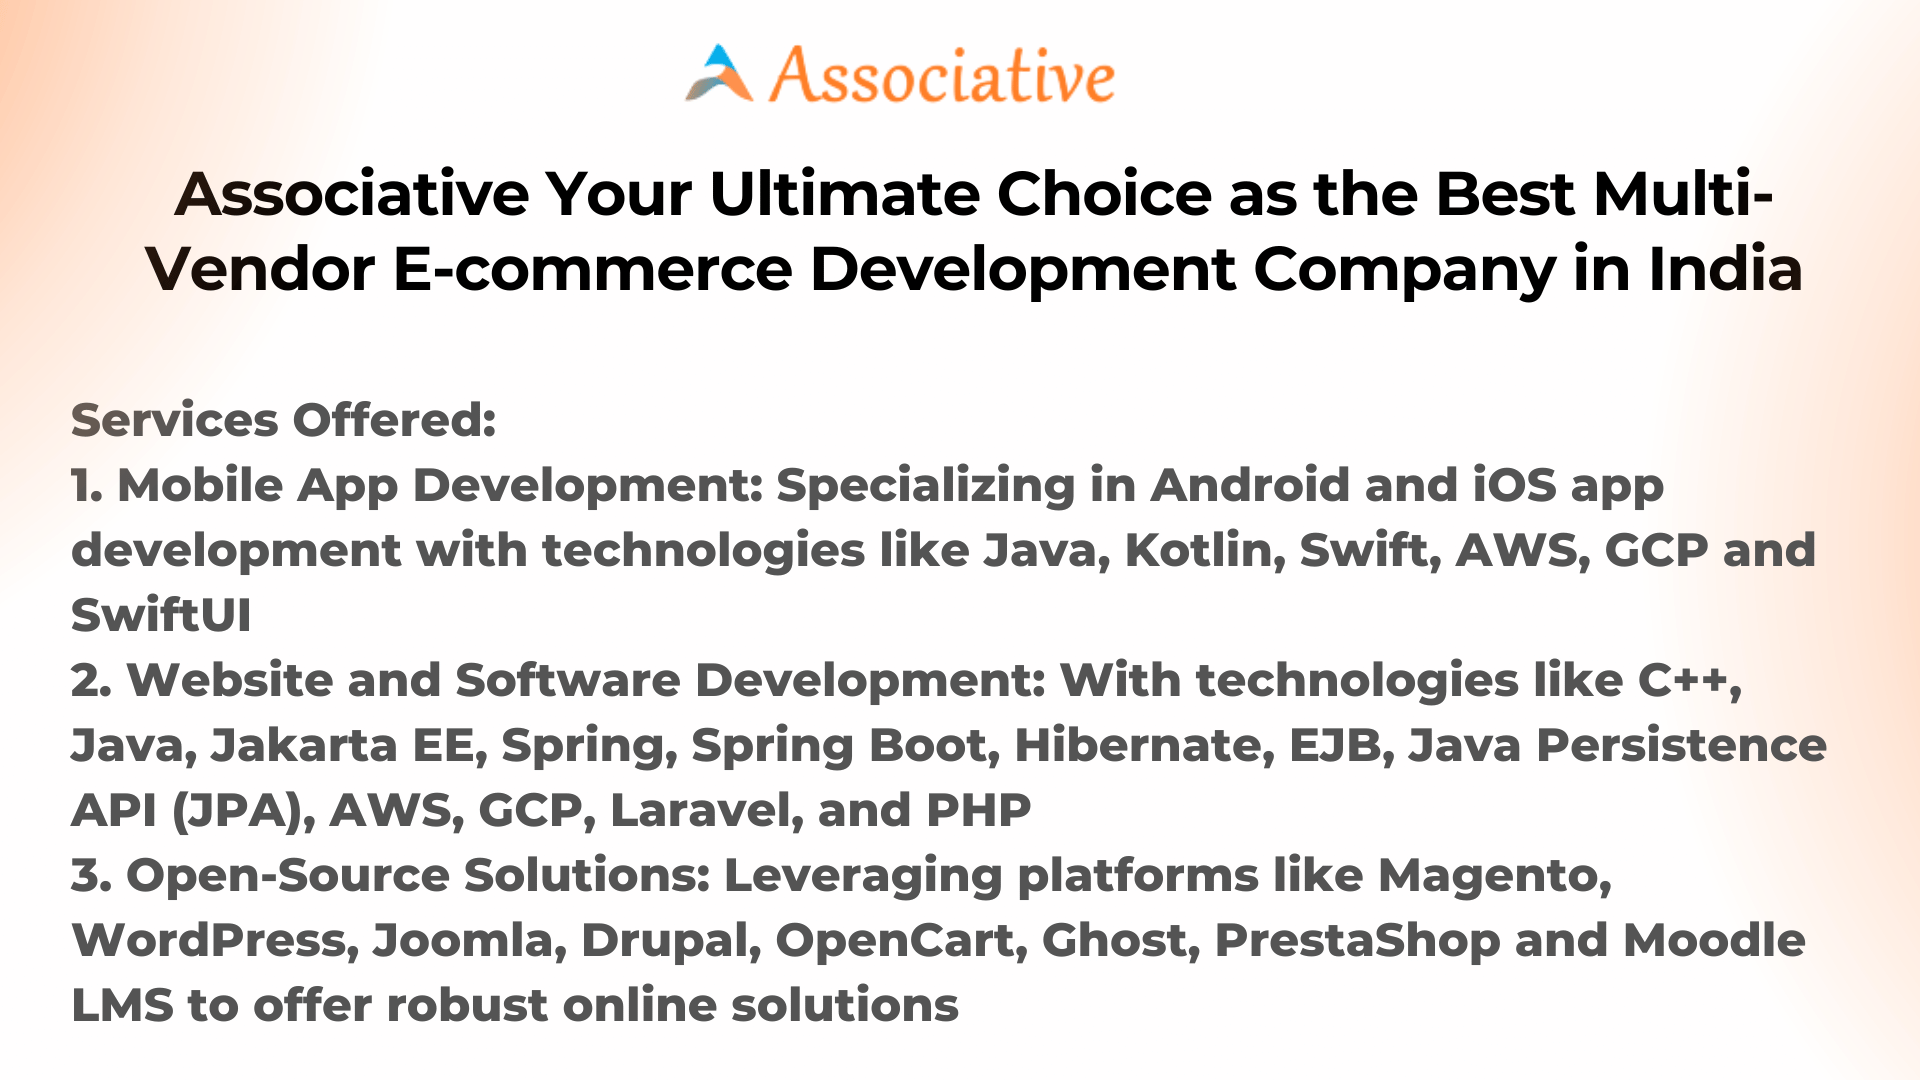 Associative Your Ultimate Choice as the Best Multi-Vendor E-commerce Development Company in India